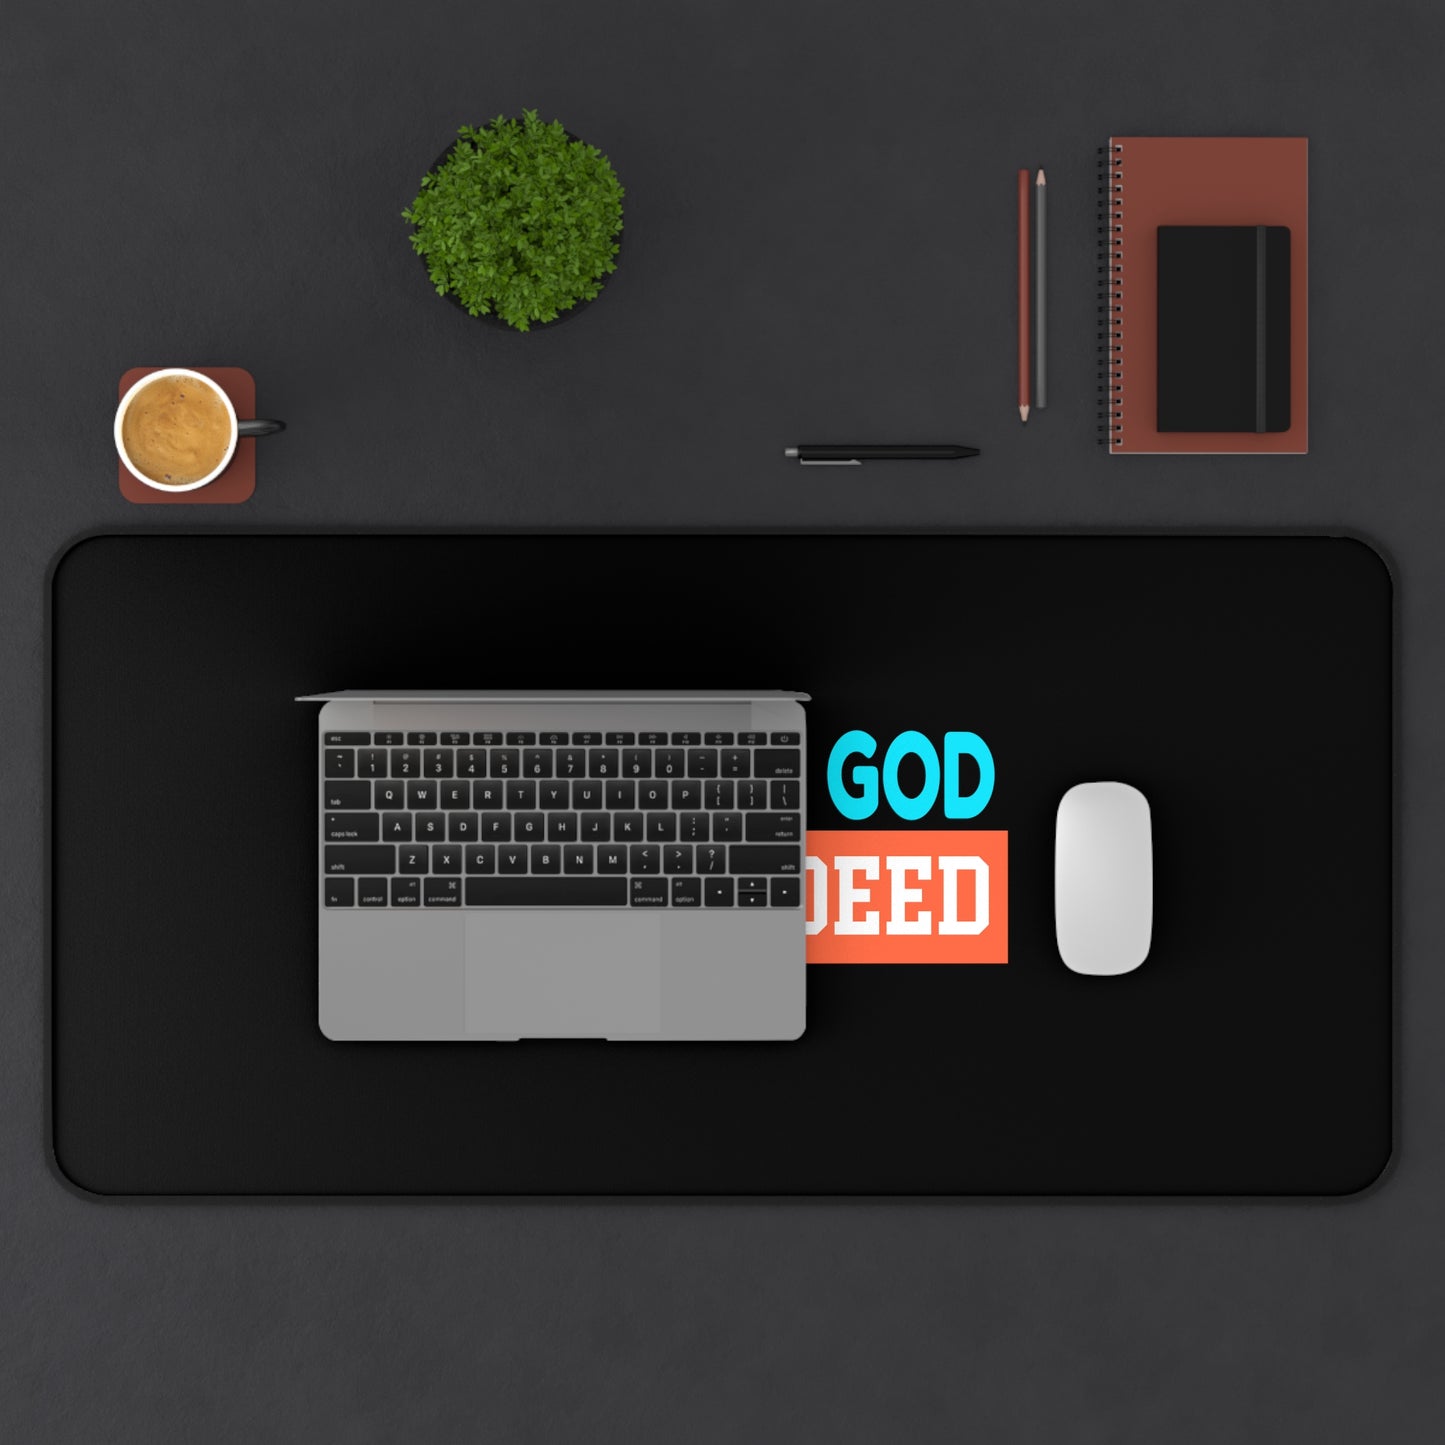 Child Of God Free Indeed Christian Computer Keyboard Mouse Desk Mat